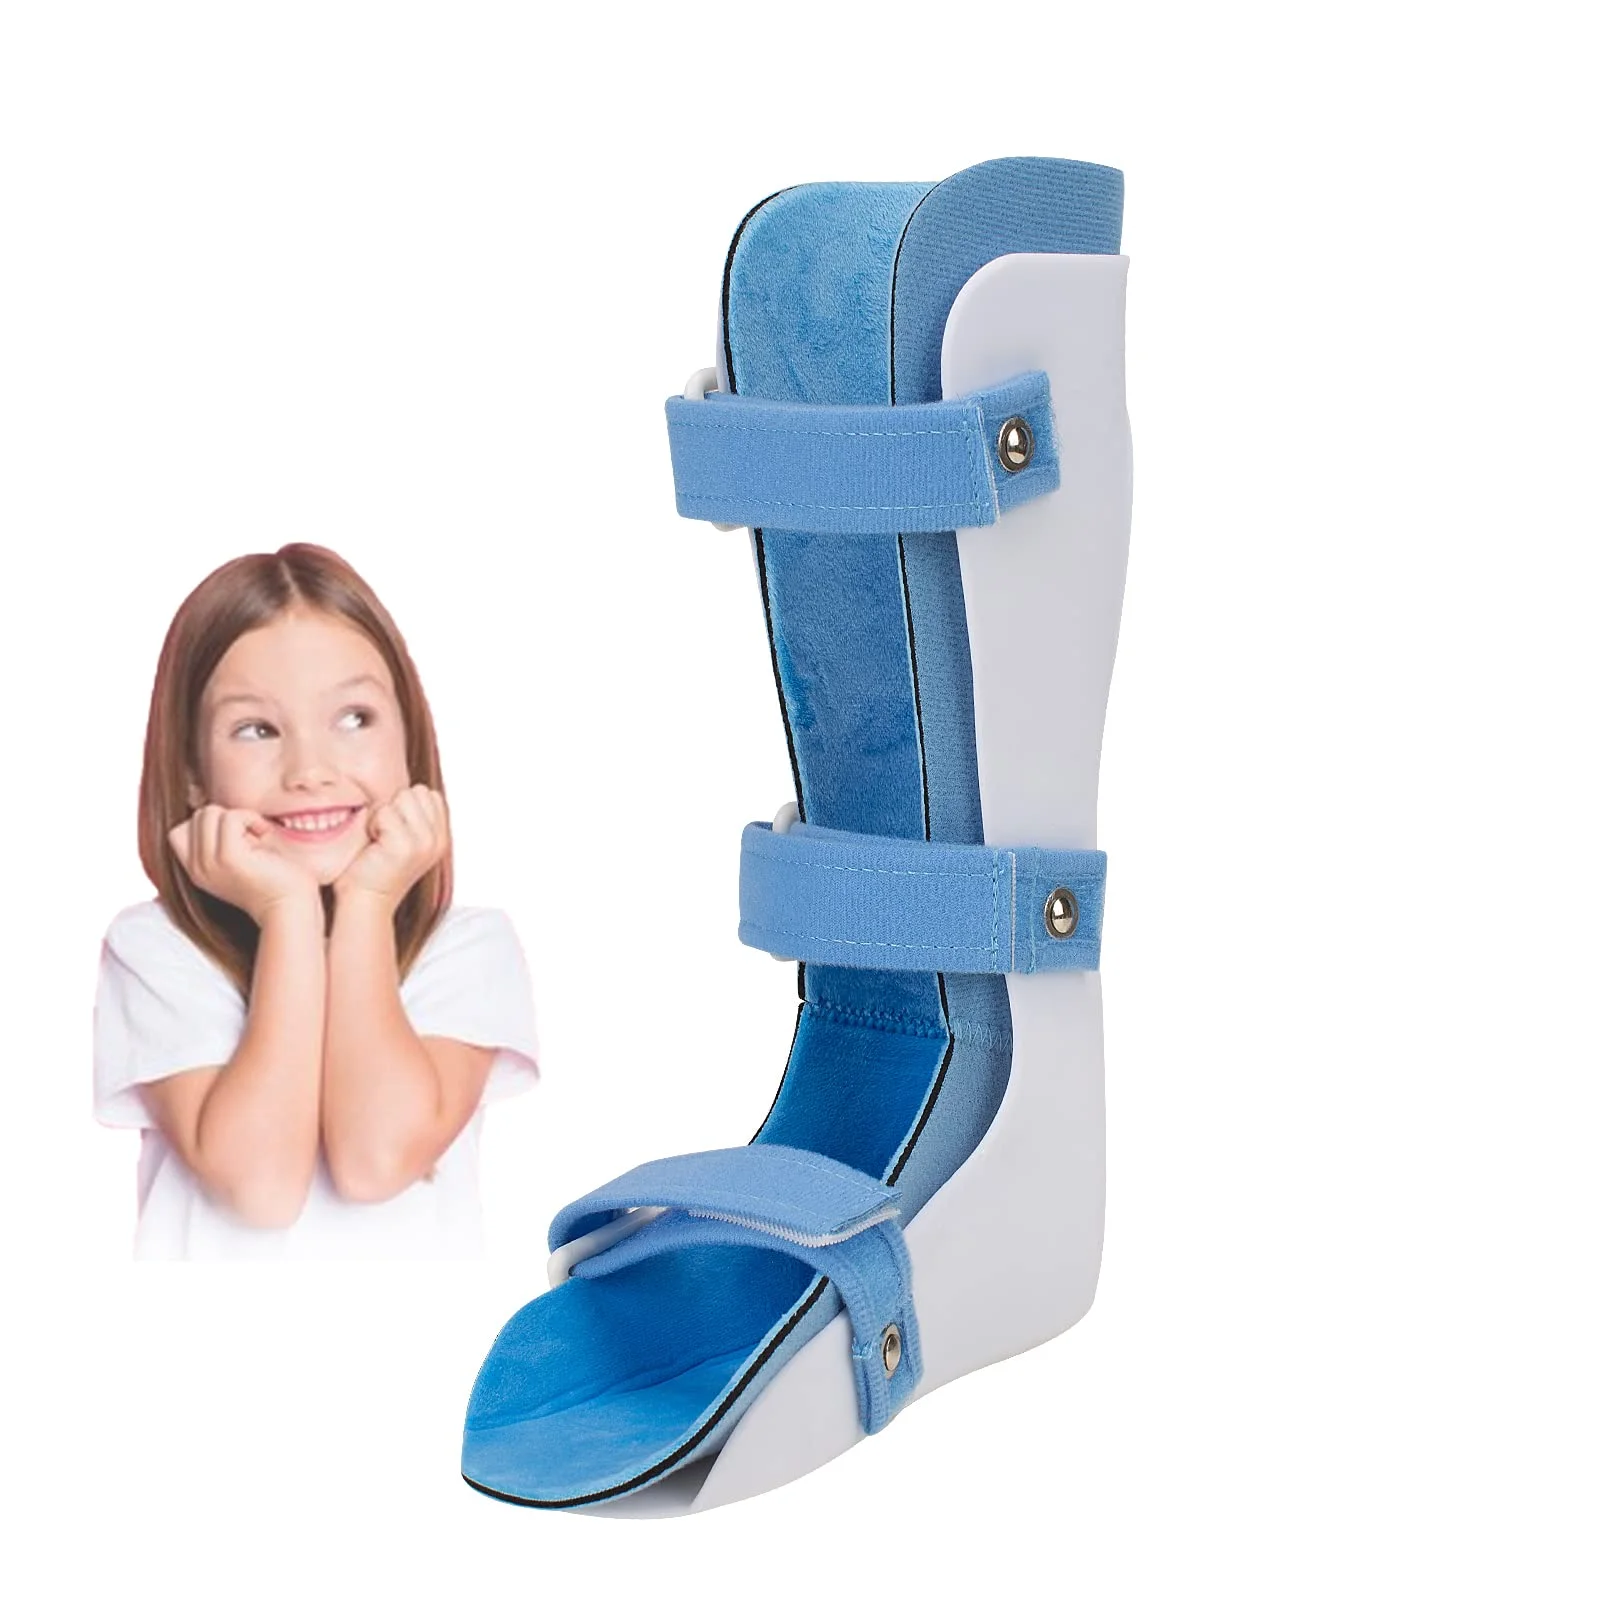 Tairibousy Brace Kids AFO Drop Foot for Child Toddler Ankle Foot Orthosis Pediatric Night Splint for Children Foot Care Tool